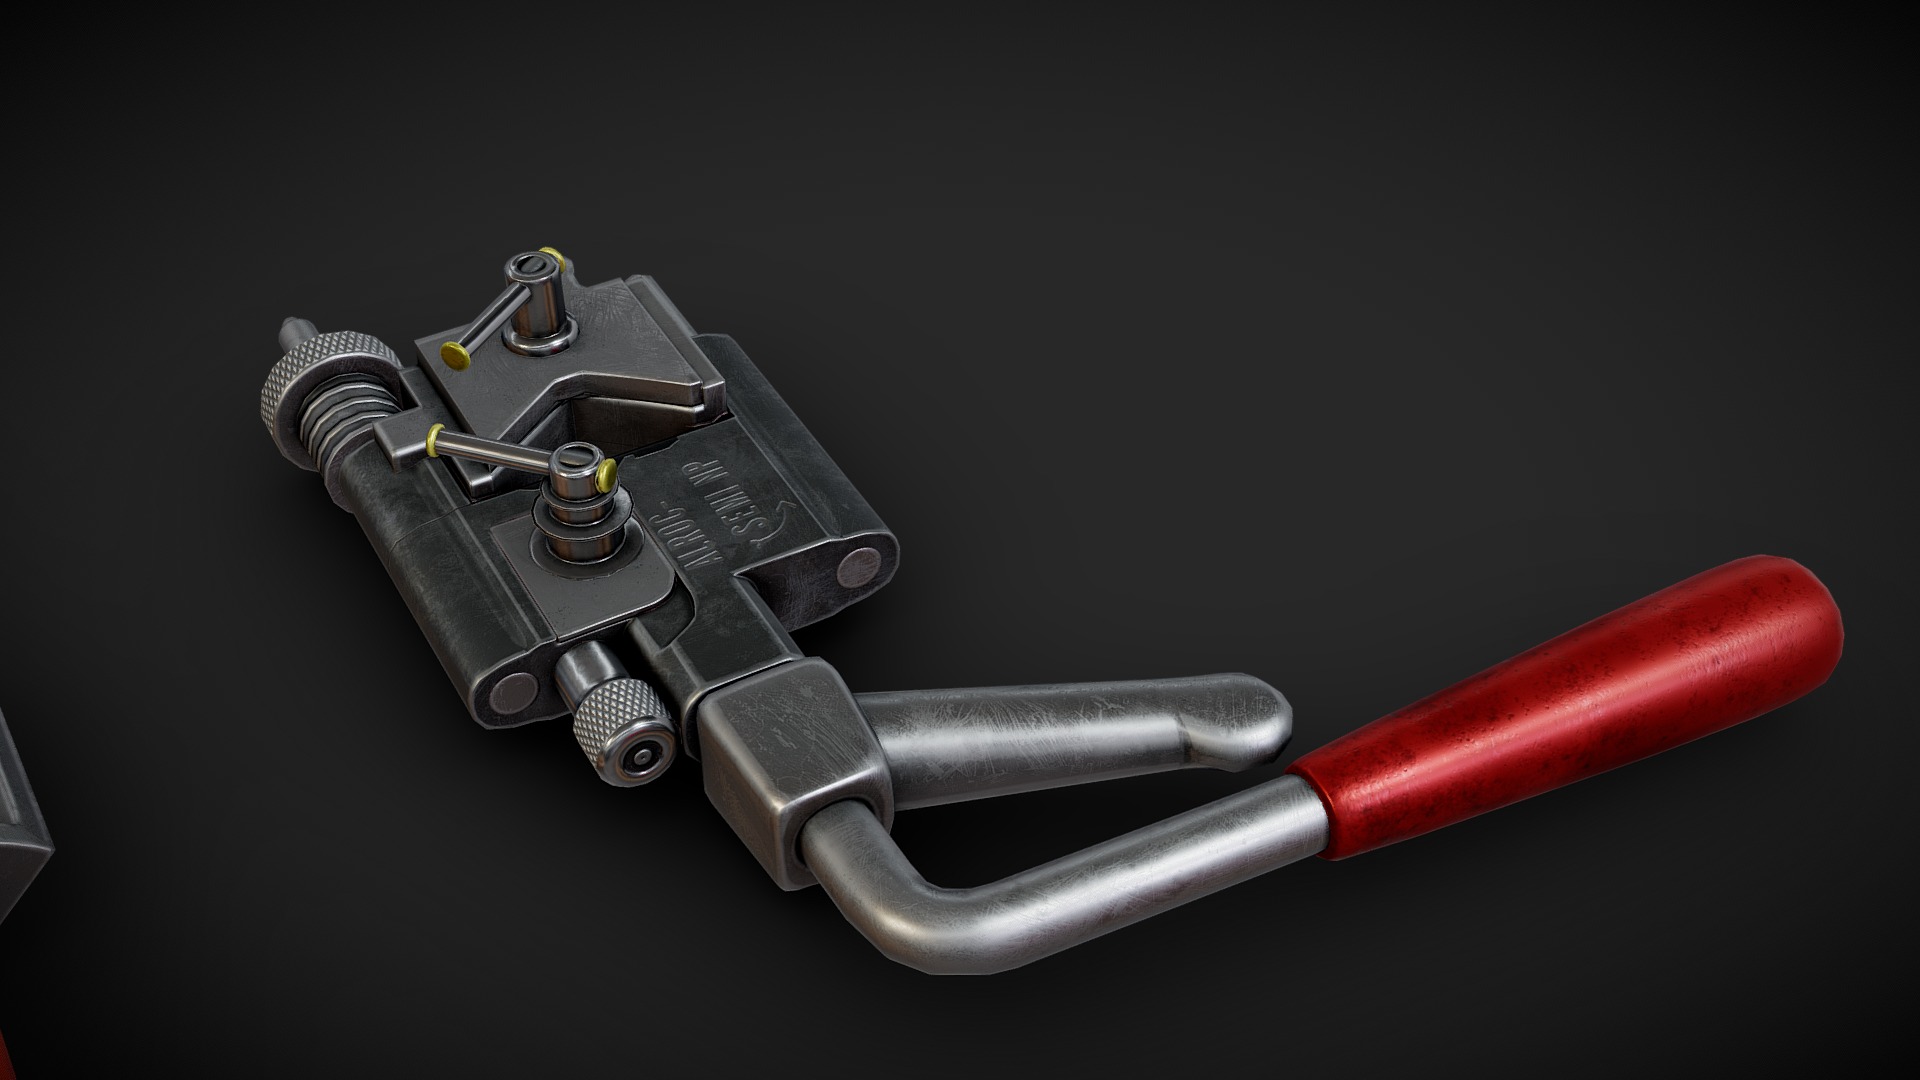 3D model Alroc Bonded Semiconductor Screen Removal Tool - This is a 3D model of the Alroc Bonded Semiconductor Screen Removal Tool. The 3D model is about a close-up of a gun.